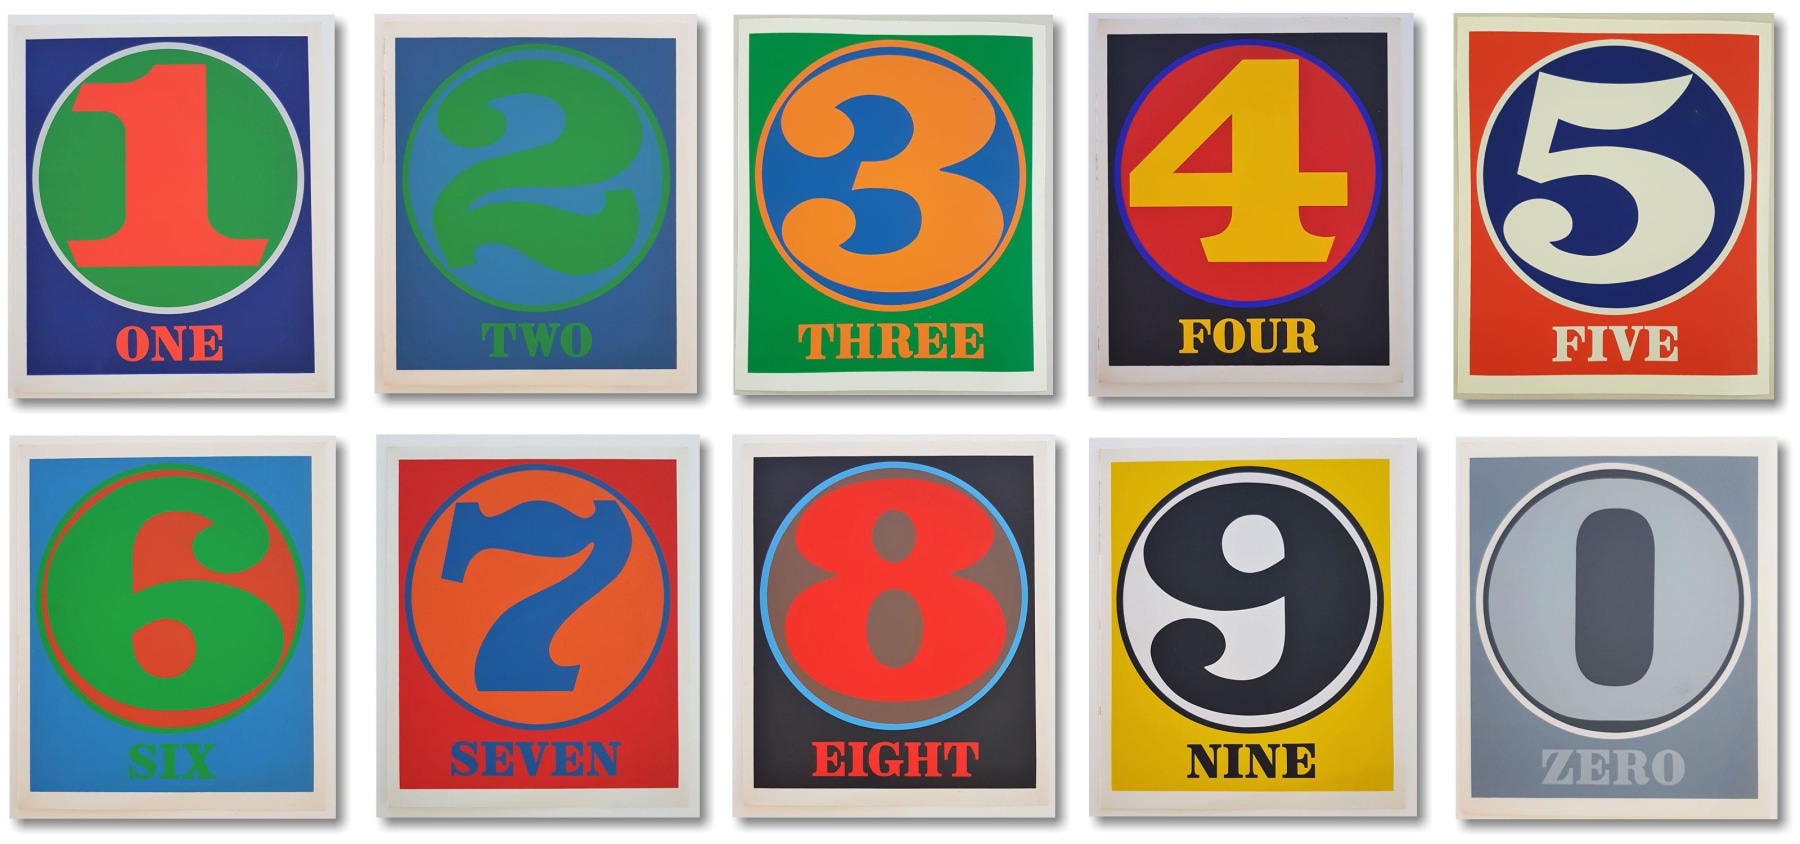 Numbers, 1968. Ten Serigraphs in colors on white Schoellers Parole paper. Edition: 125 plus 35 Artist proofs. Image: 23 7/16 x 19 5/8 inches (59.5 x 49.8 cm). Sheet: 25 9/16 x 19 5/8 inches (64.9 x 49.8 cm). Printer: DombergerKG, Bonlanden bei Stuttgart, West Germany. Publisher: Edition Domberger, Bonlanden be Stuttgart, West Germany, and Galerie Schmela, D&amp;uuml;sseldorf, West Germany&amp;nbsp;